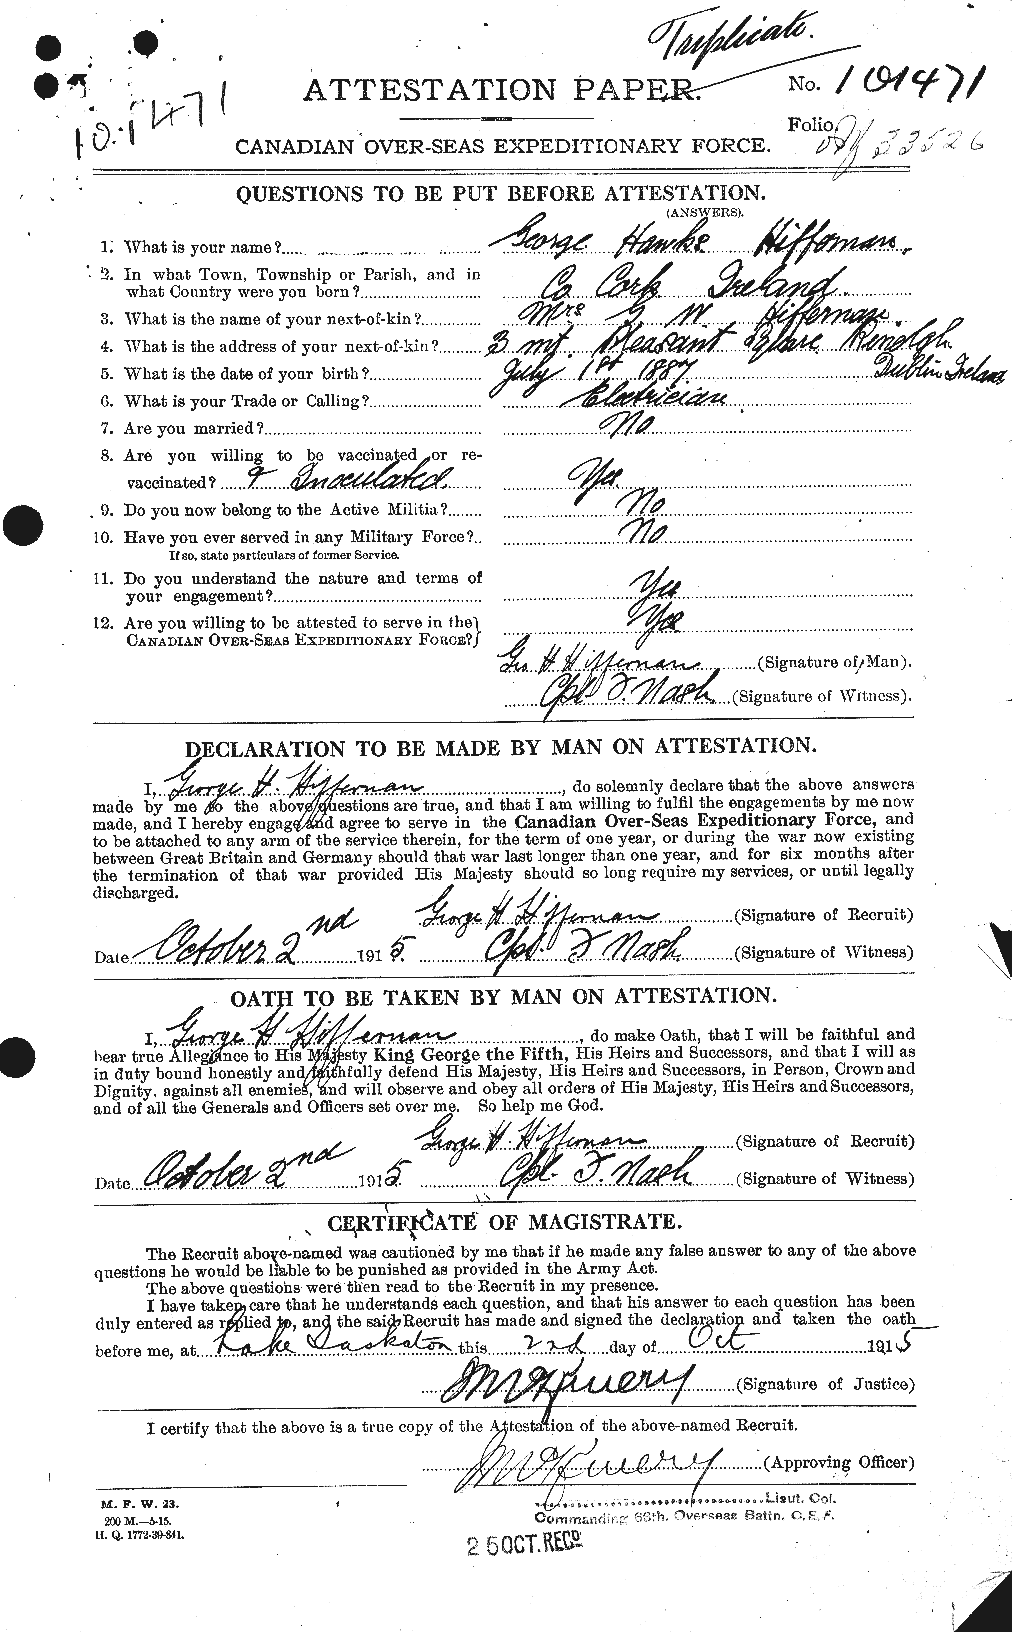 Personnel Records of the First World War - CEF 391761a